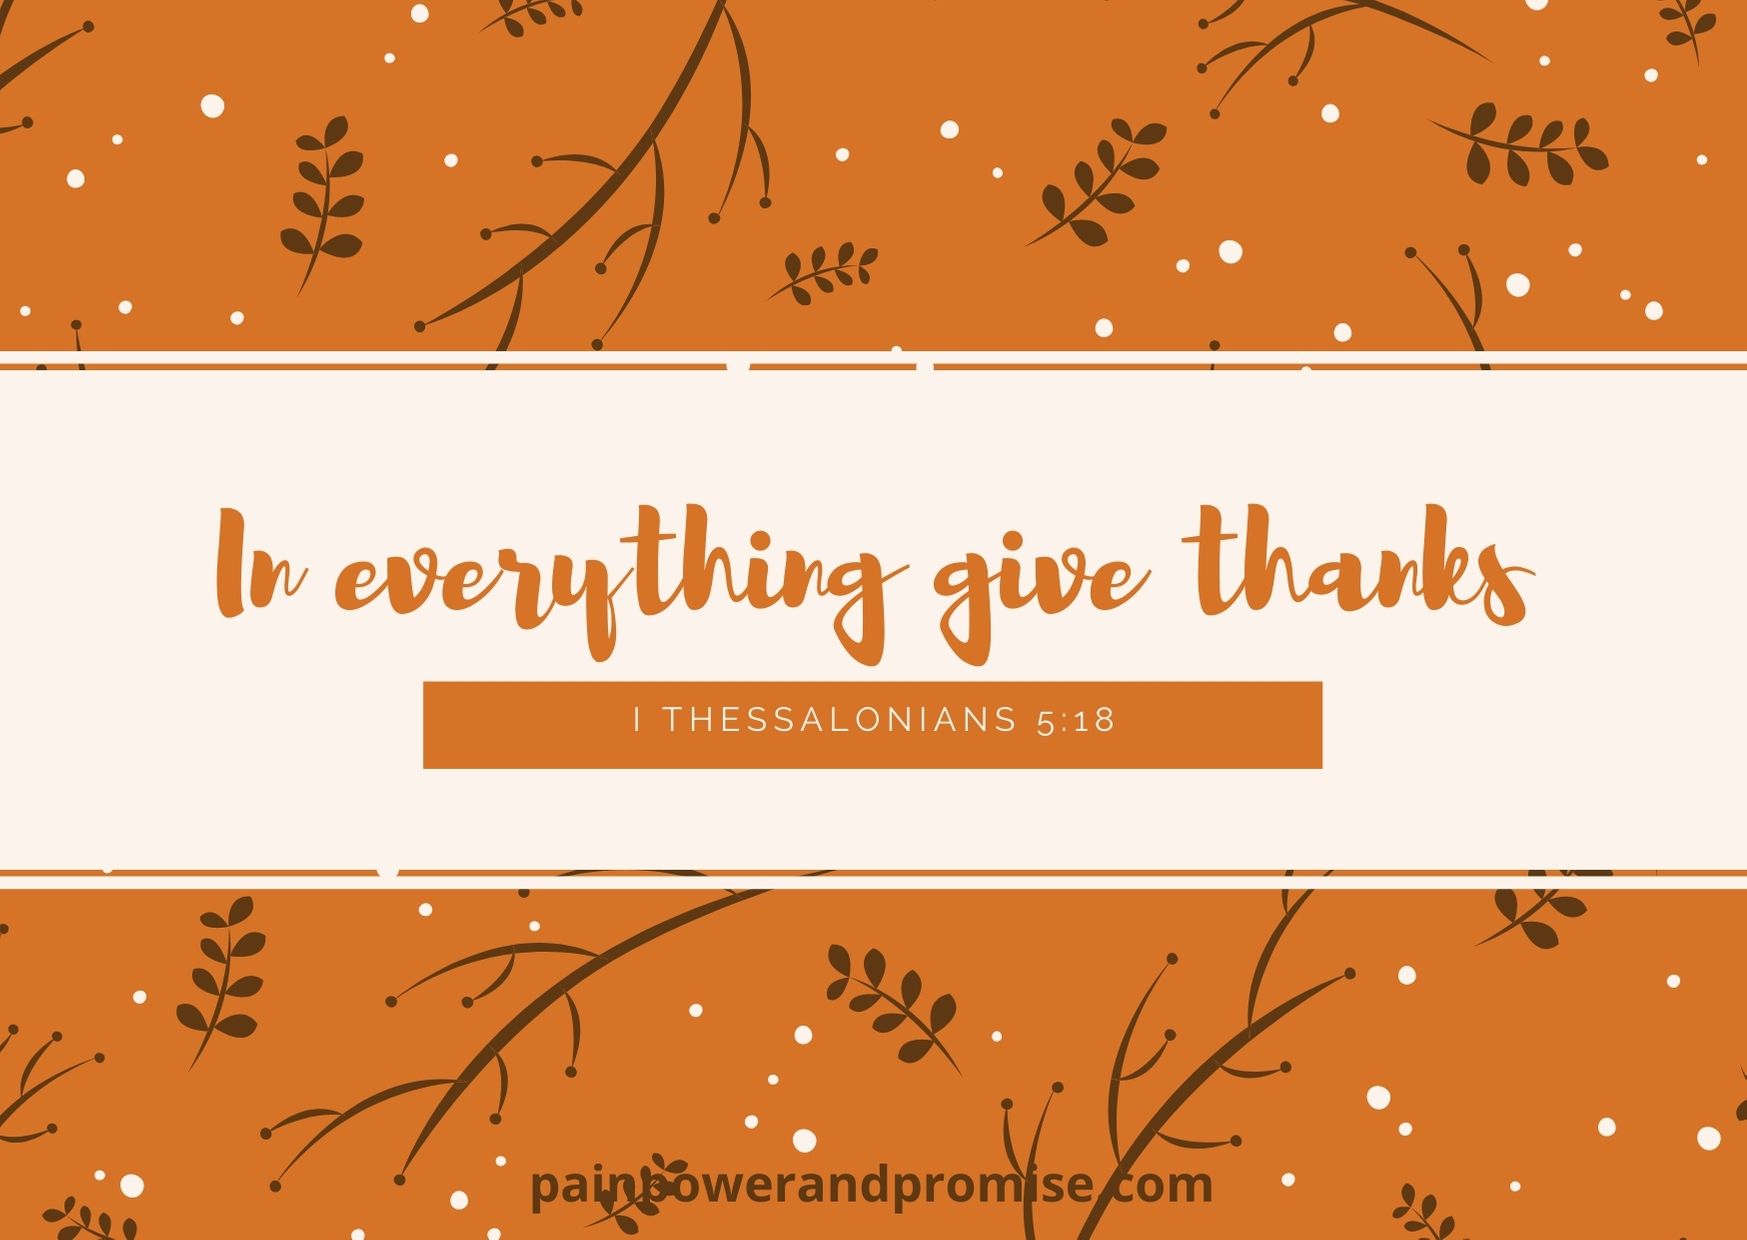 In everything give thanks